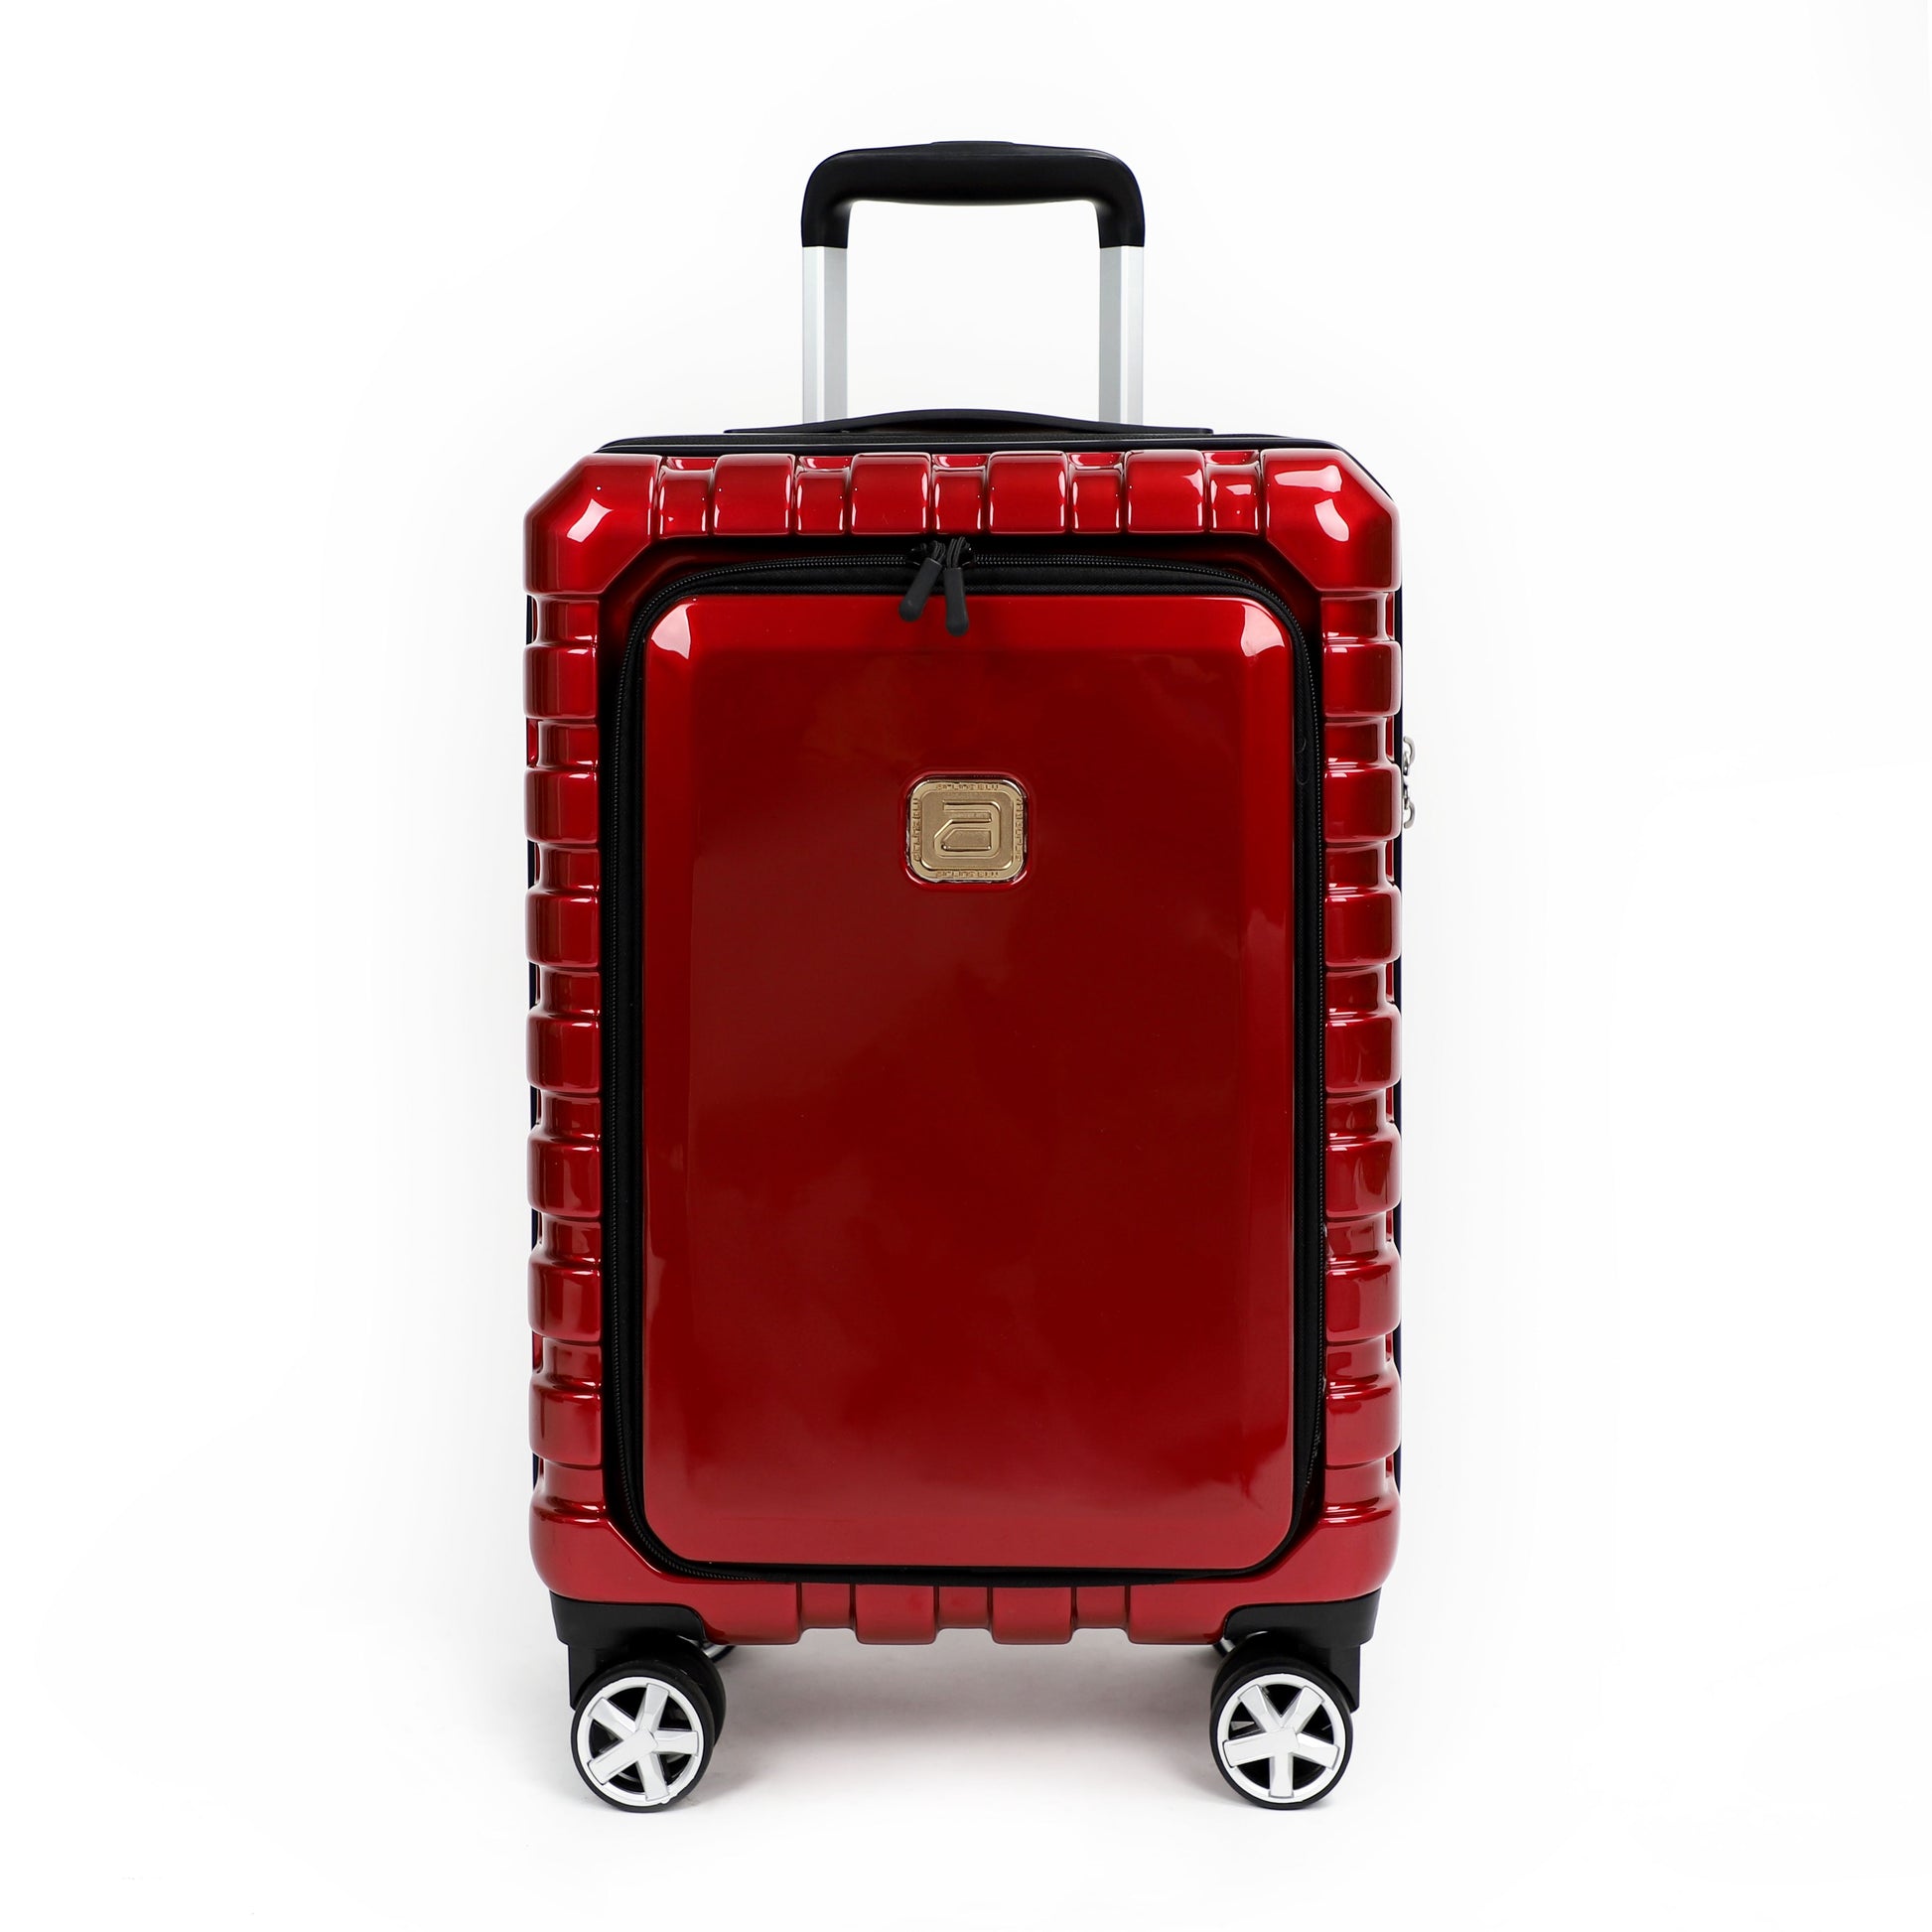 Airline_Carry_On_Luggage_Red_front_viewT1978155002